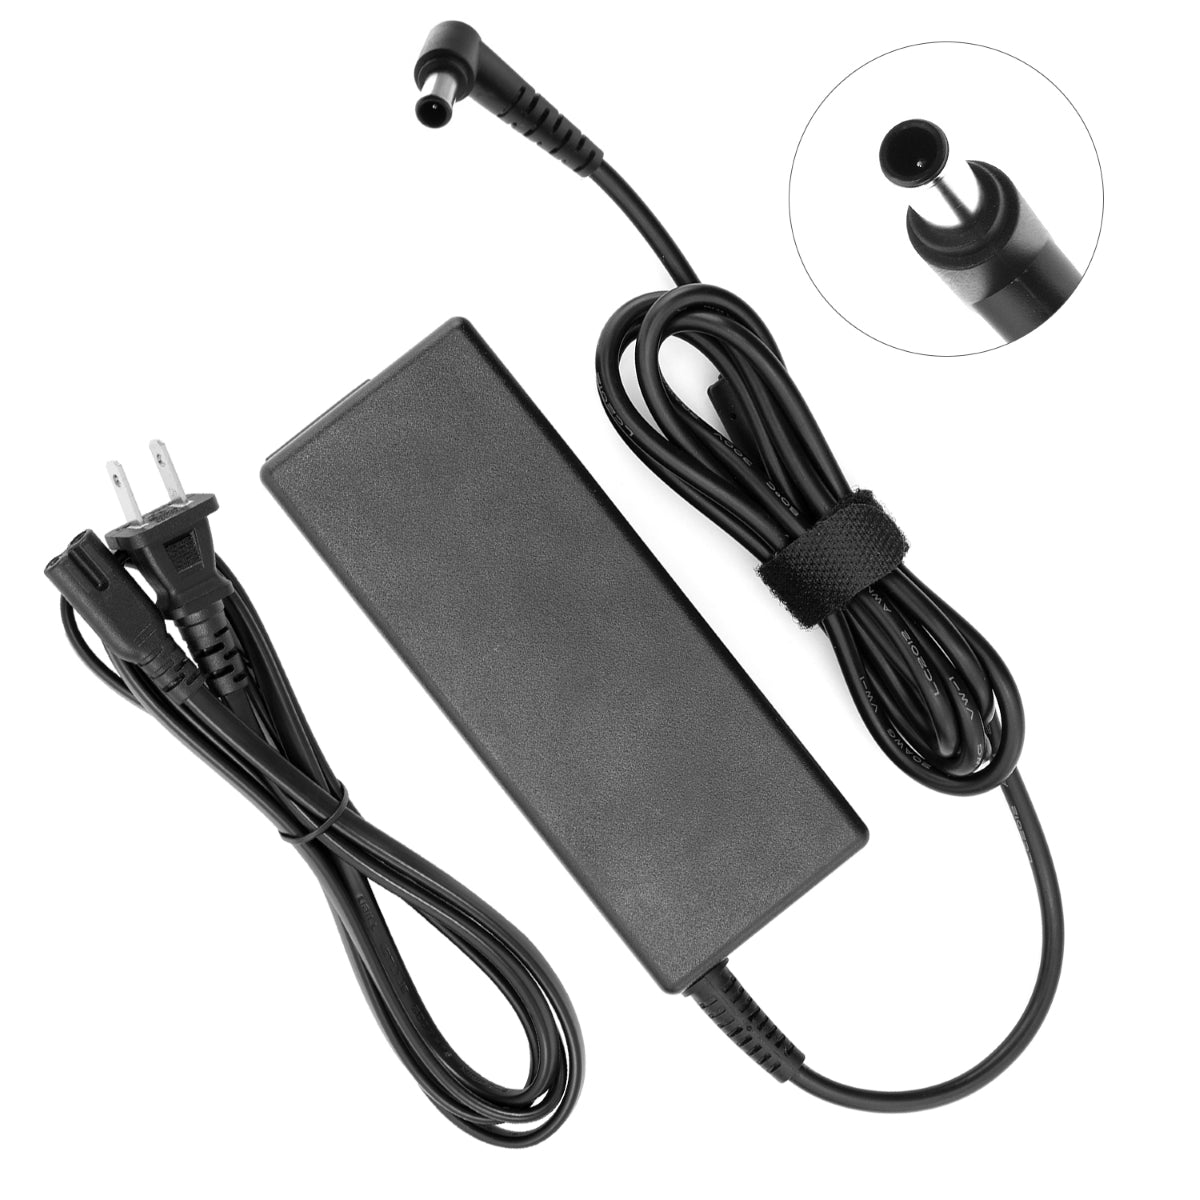 Compatible Charger for Sony Vaio PCGA-AC19V10